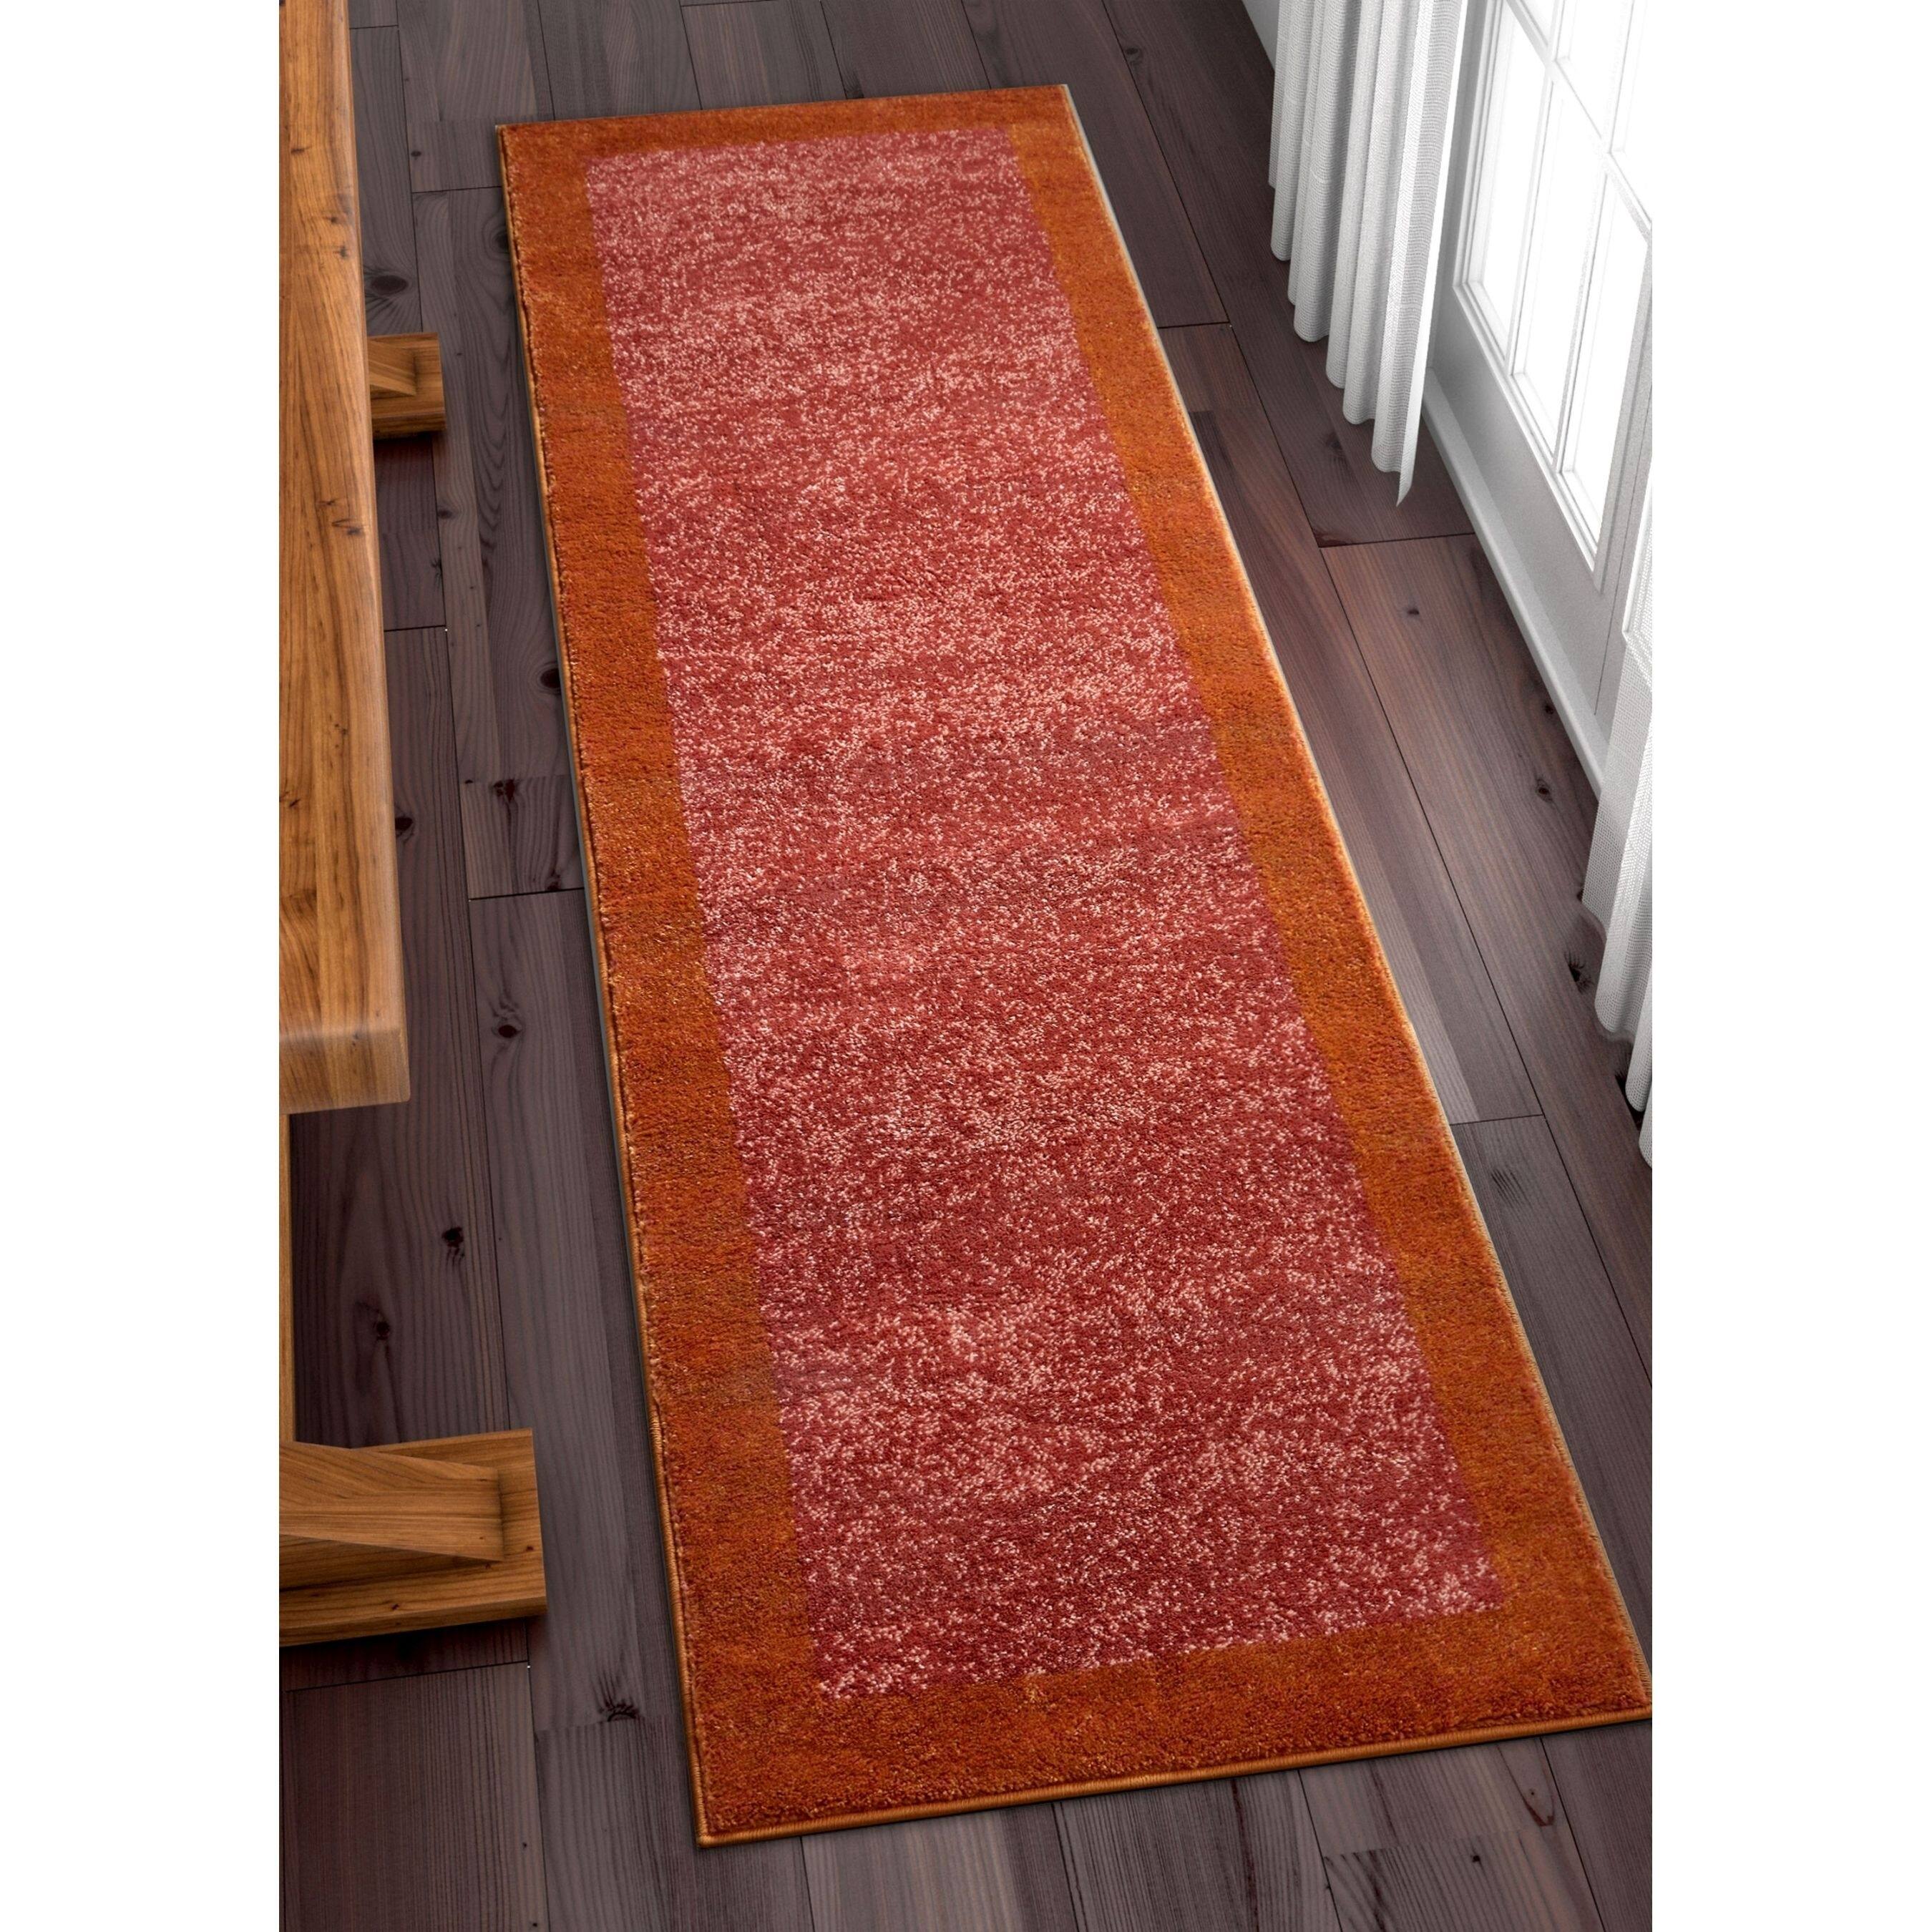 Well Woven Modern Solid Color Border Runner Rug - 2' x 7'3 - 2' x